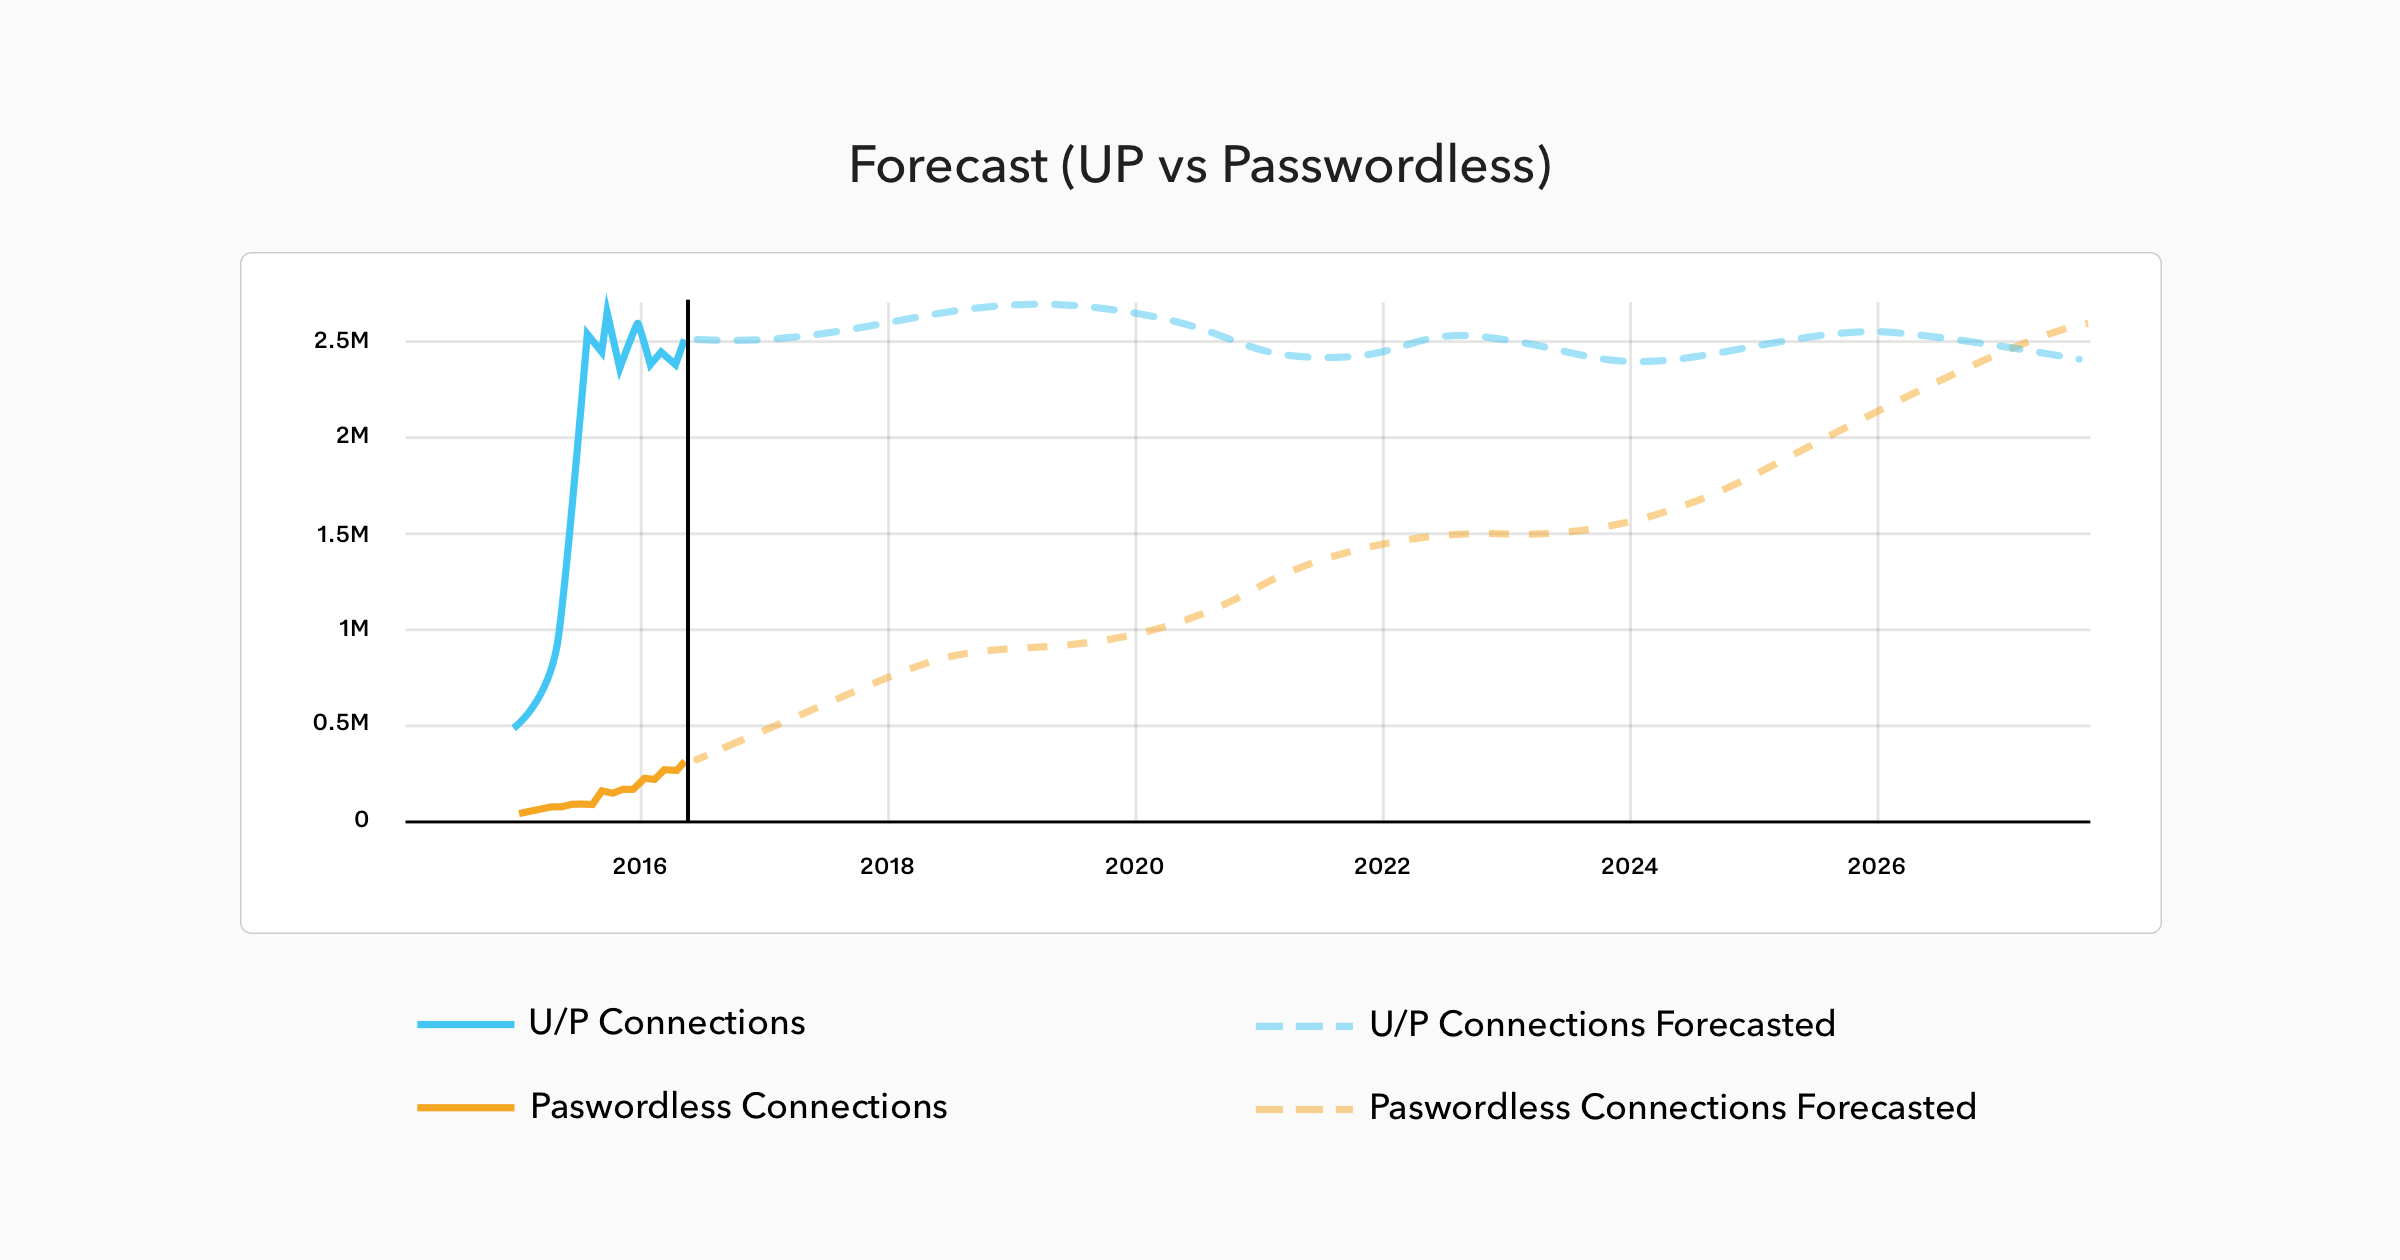 Forecast: User/Password Connections vs Passwordless Connections